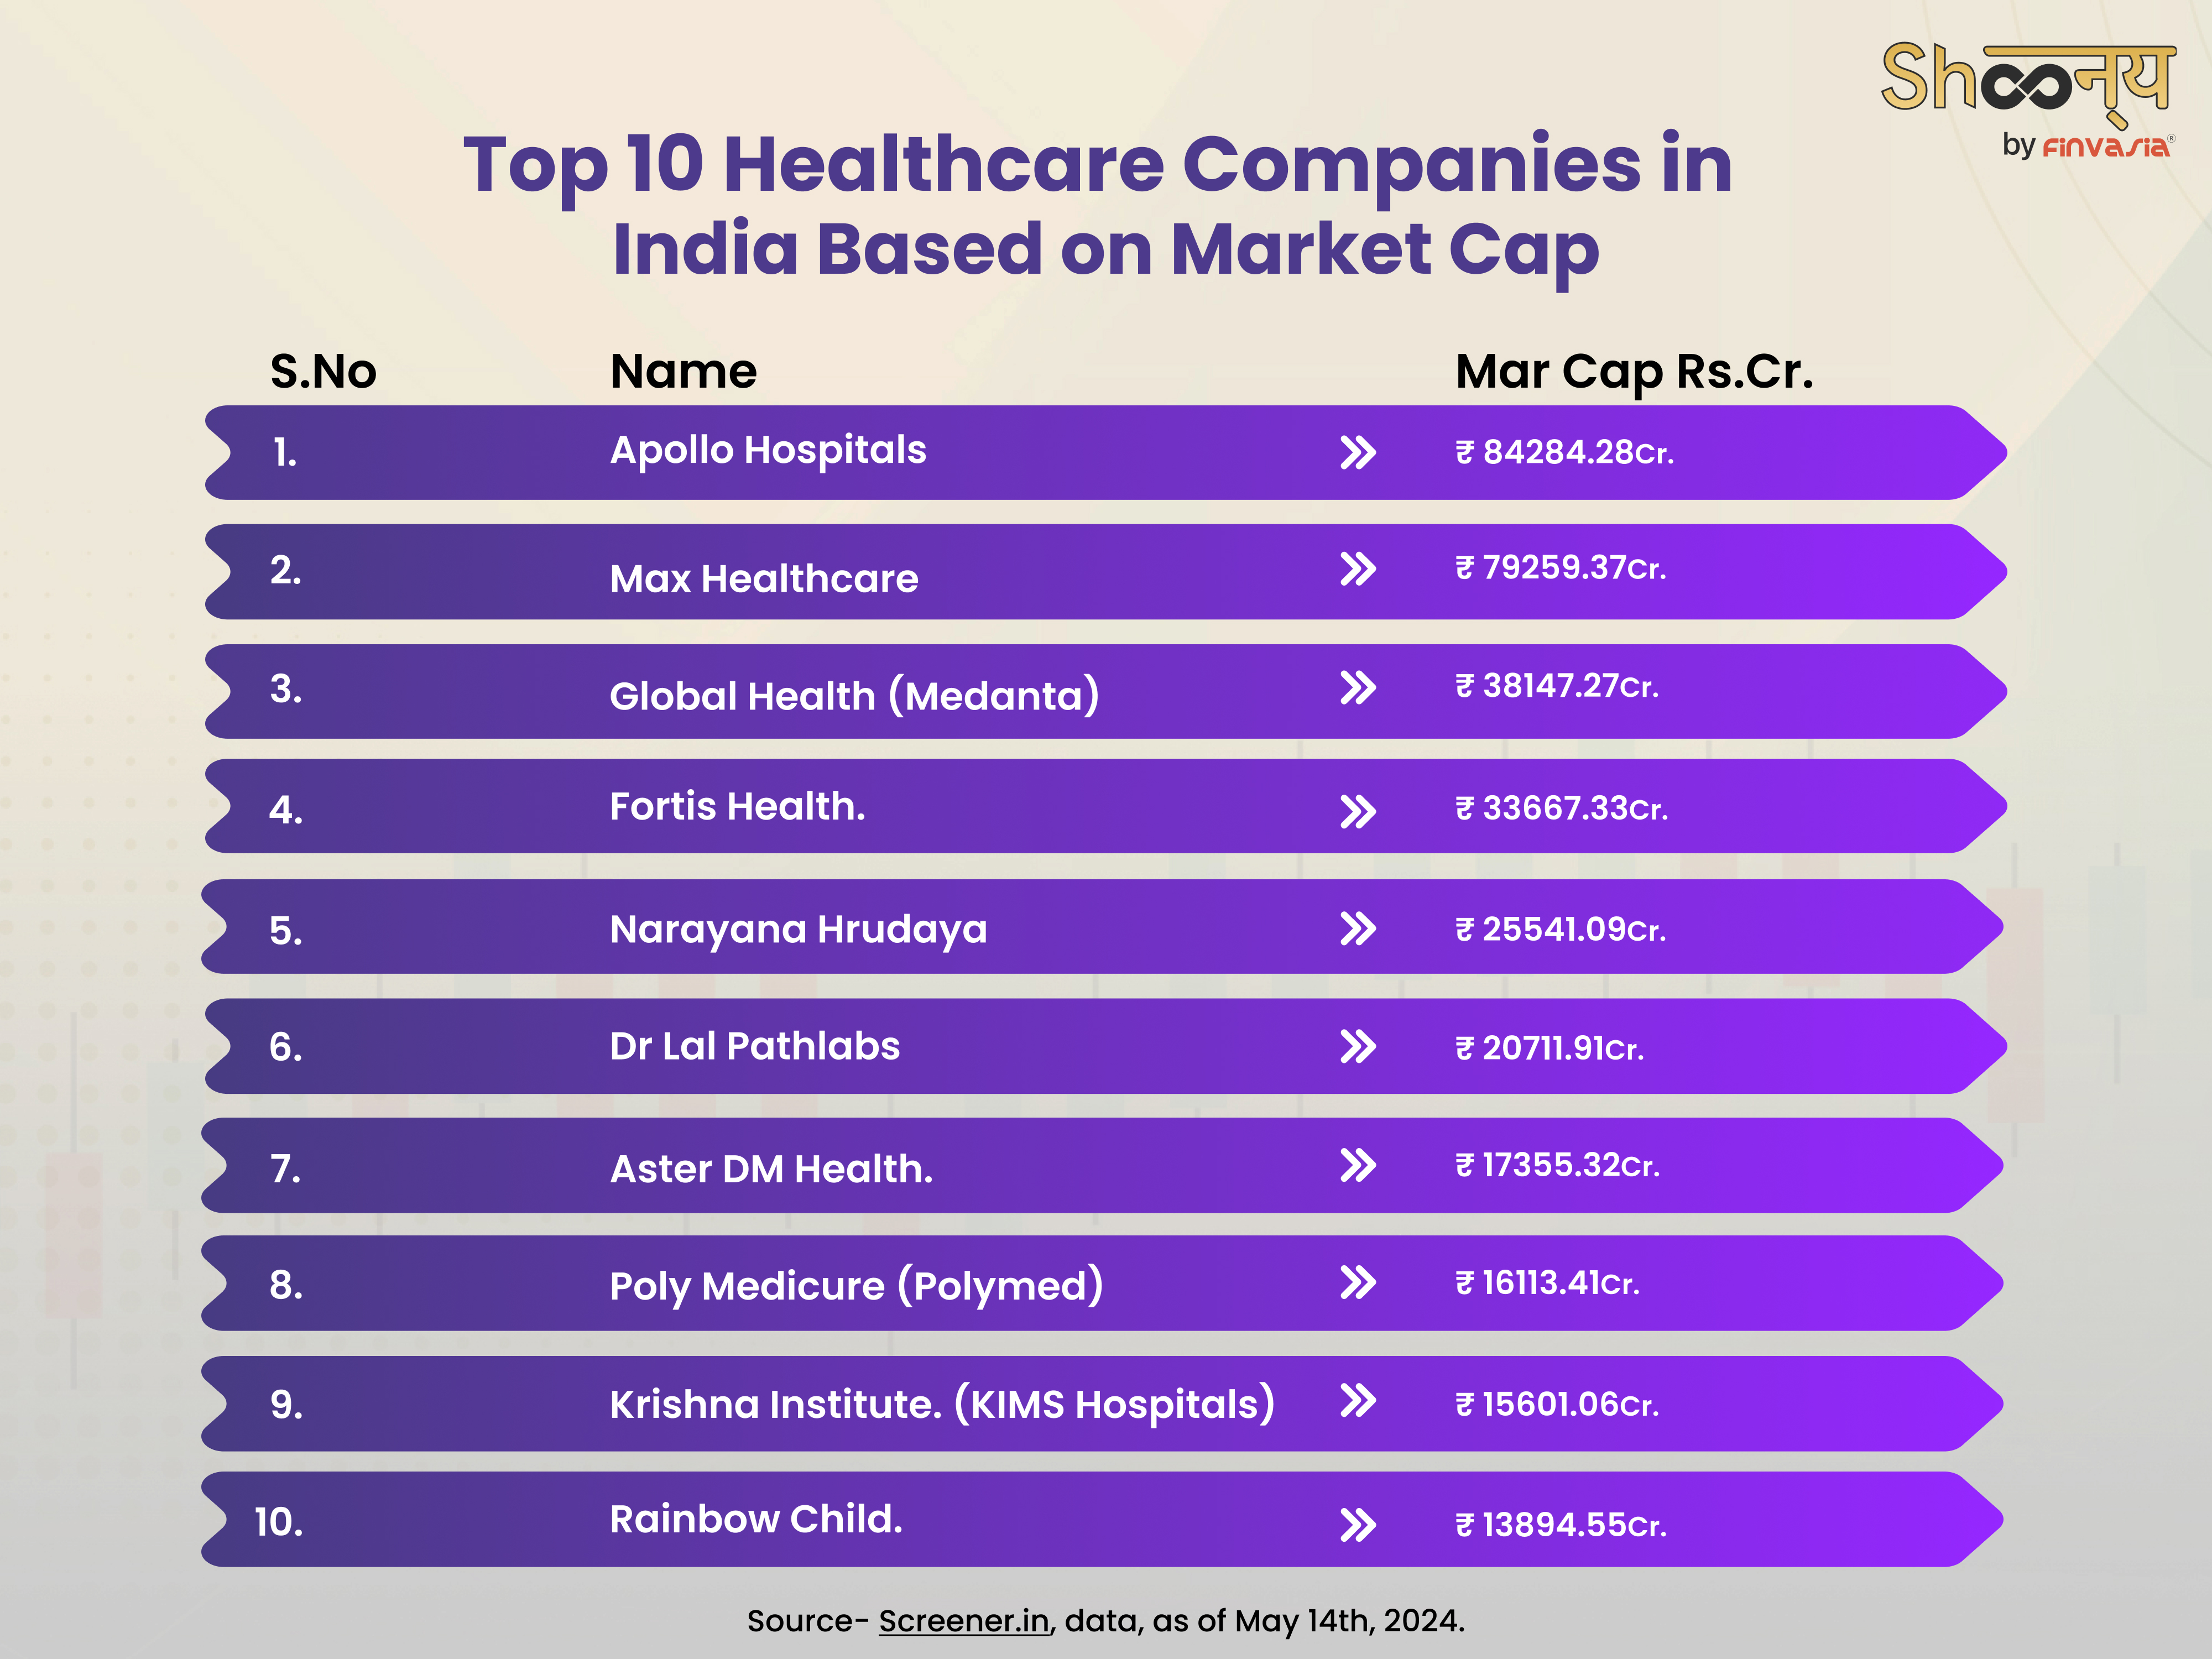 Top 10 Healthcare Companies in India Based on Market Cap